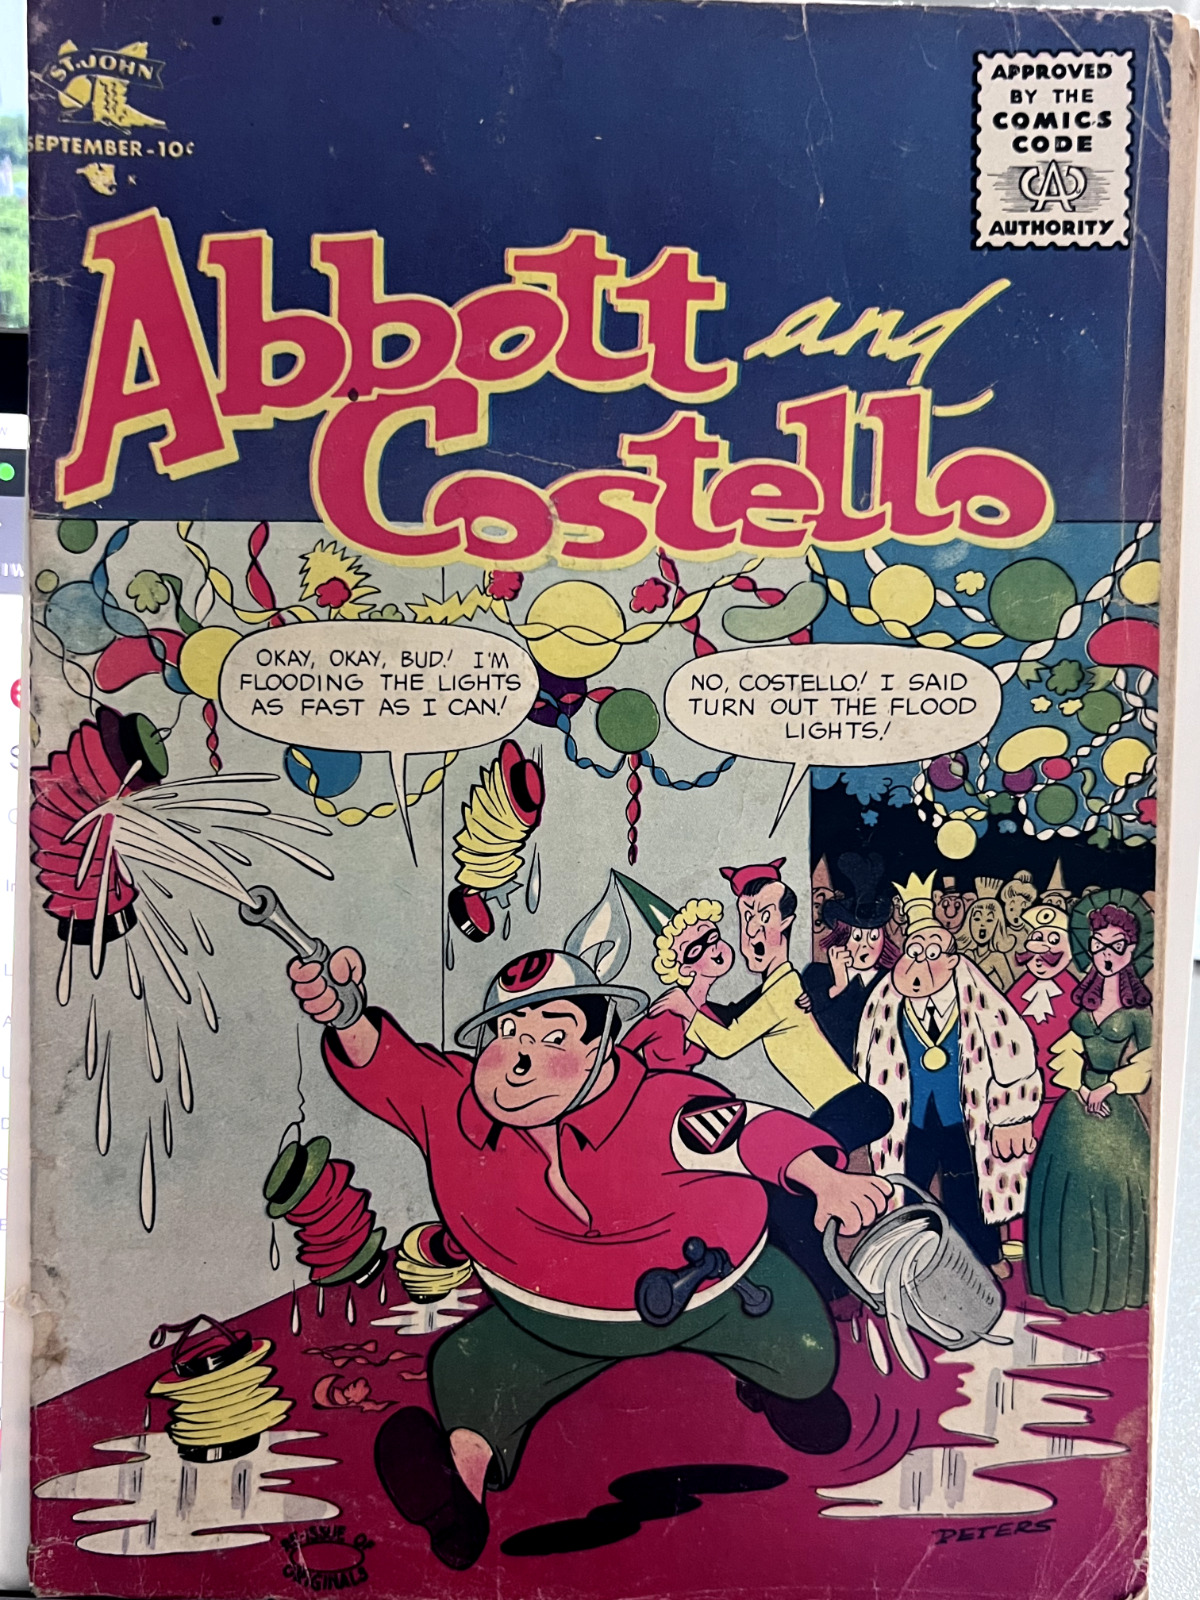 Abbot and Costello #40 FA Birthday Party